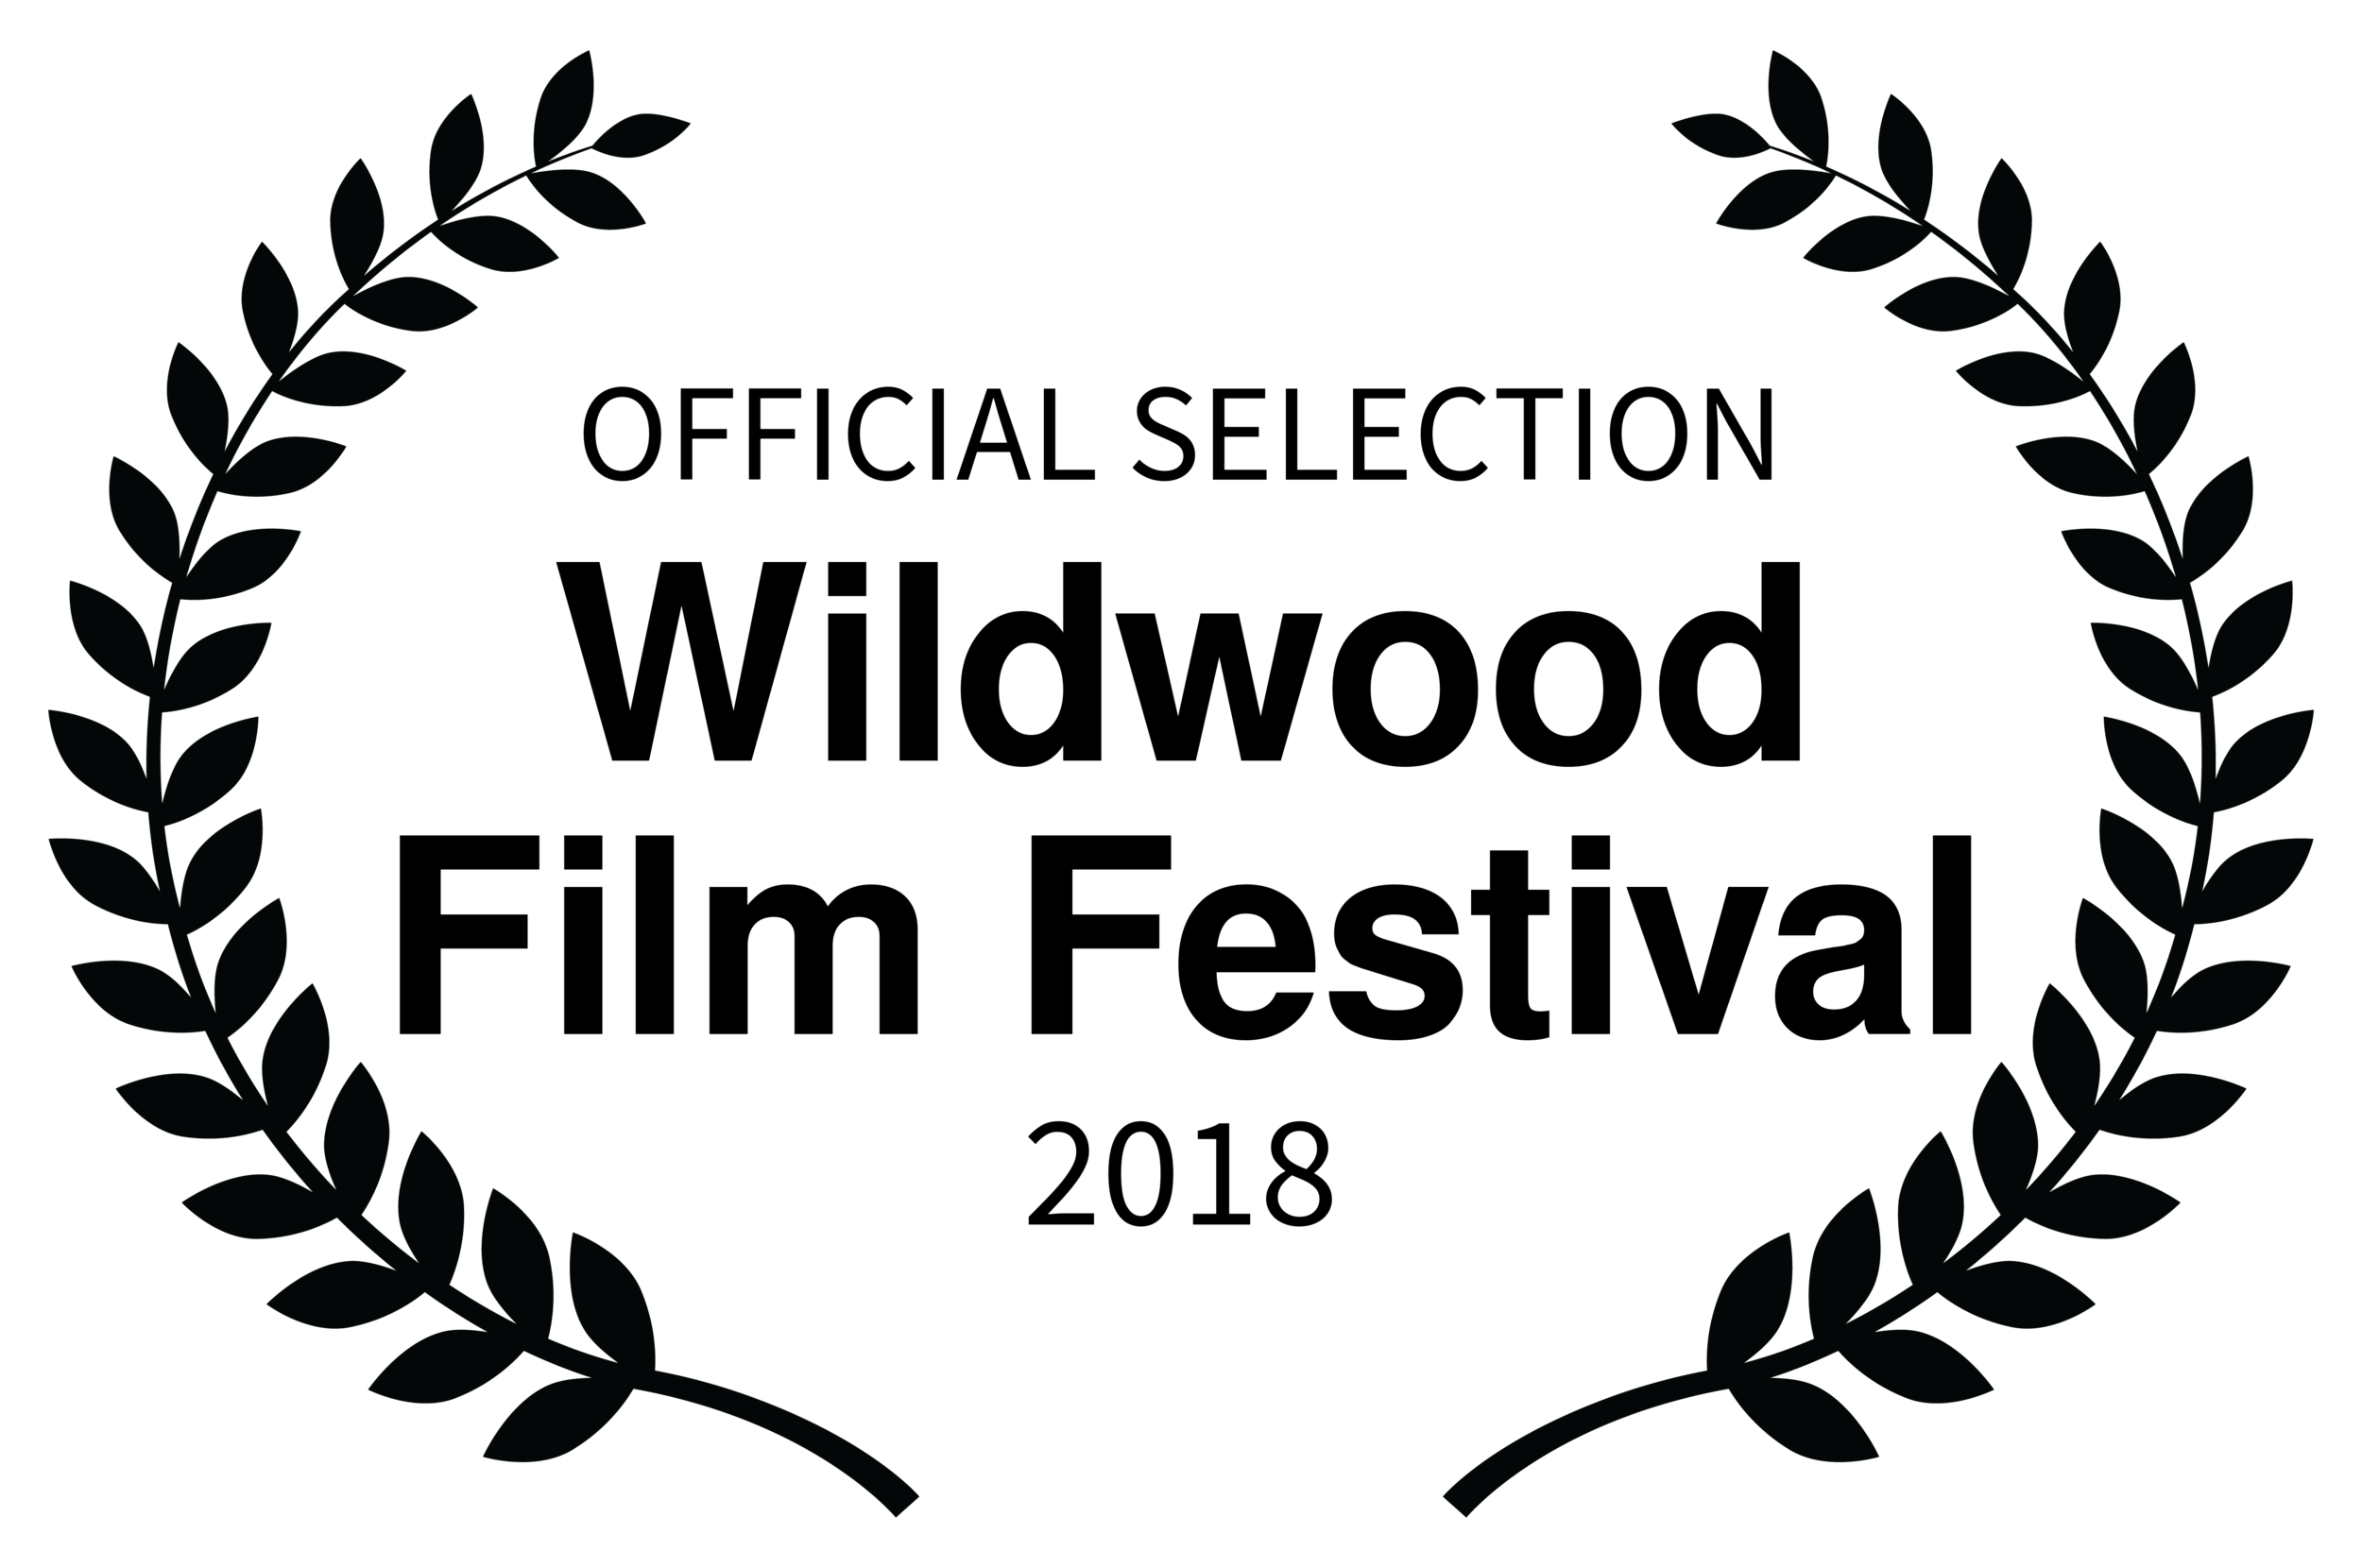 OFFICIALSELECTION-WildwoodFilmFestival-2018.png